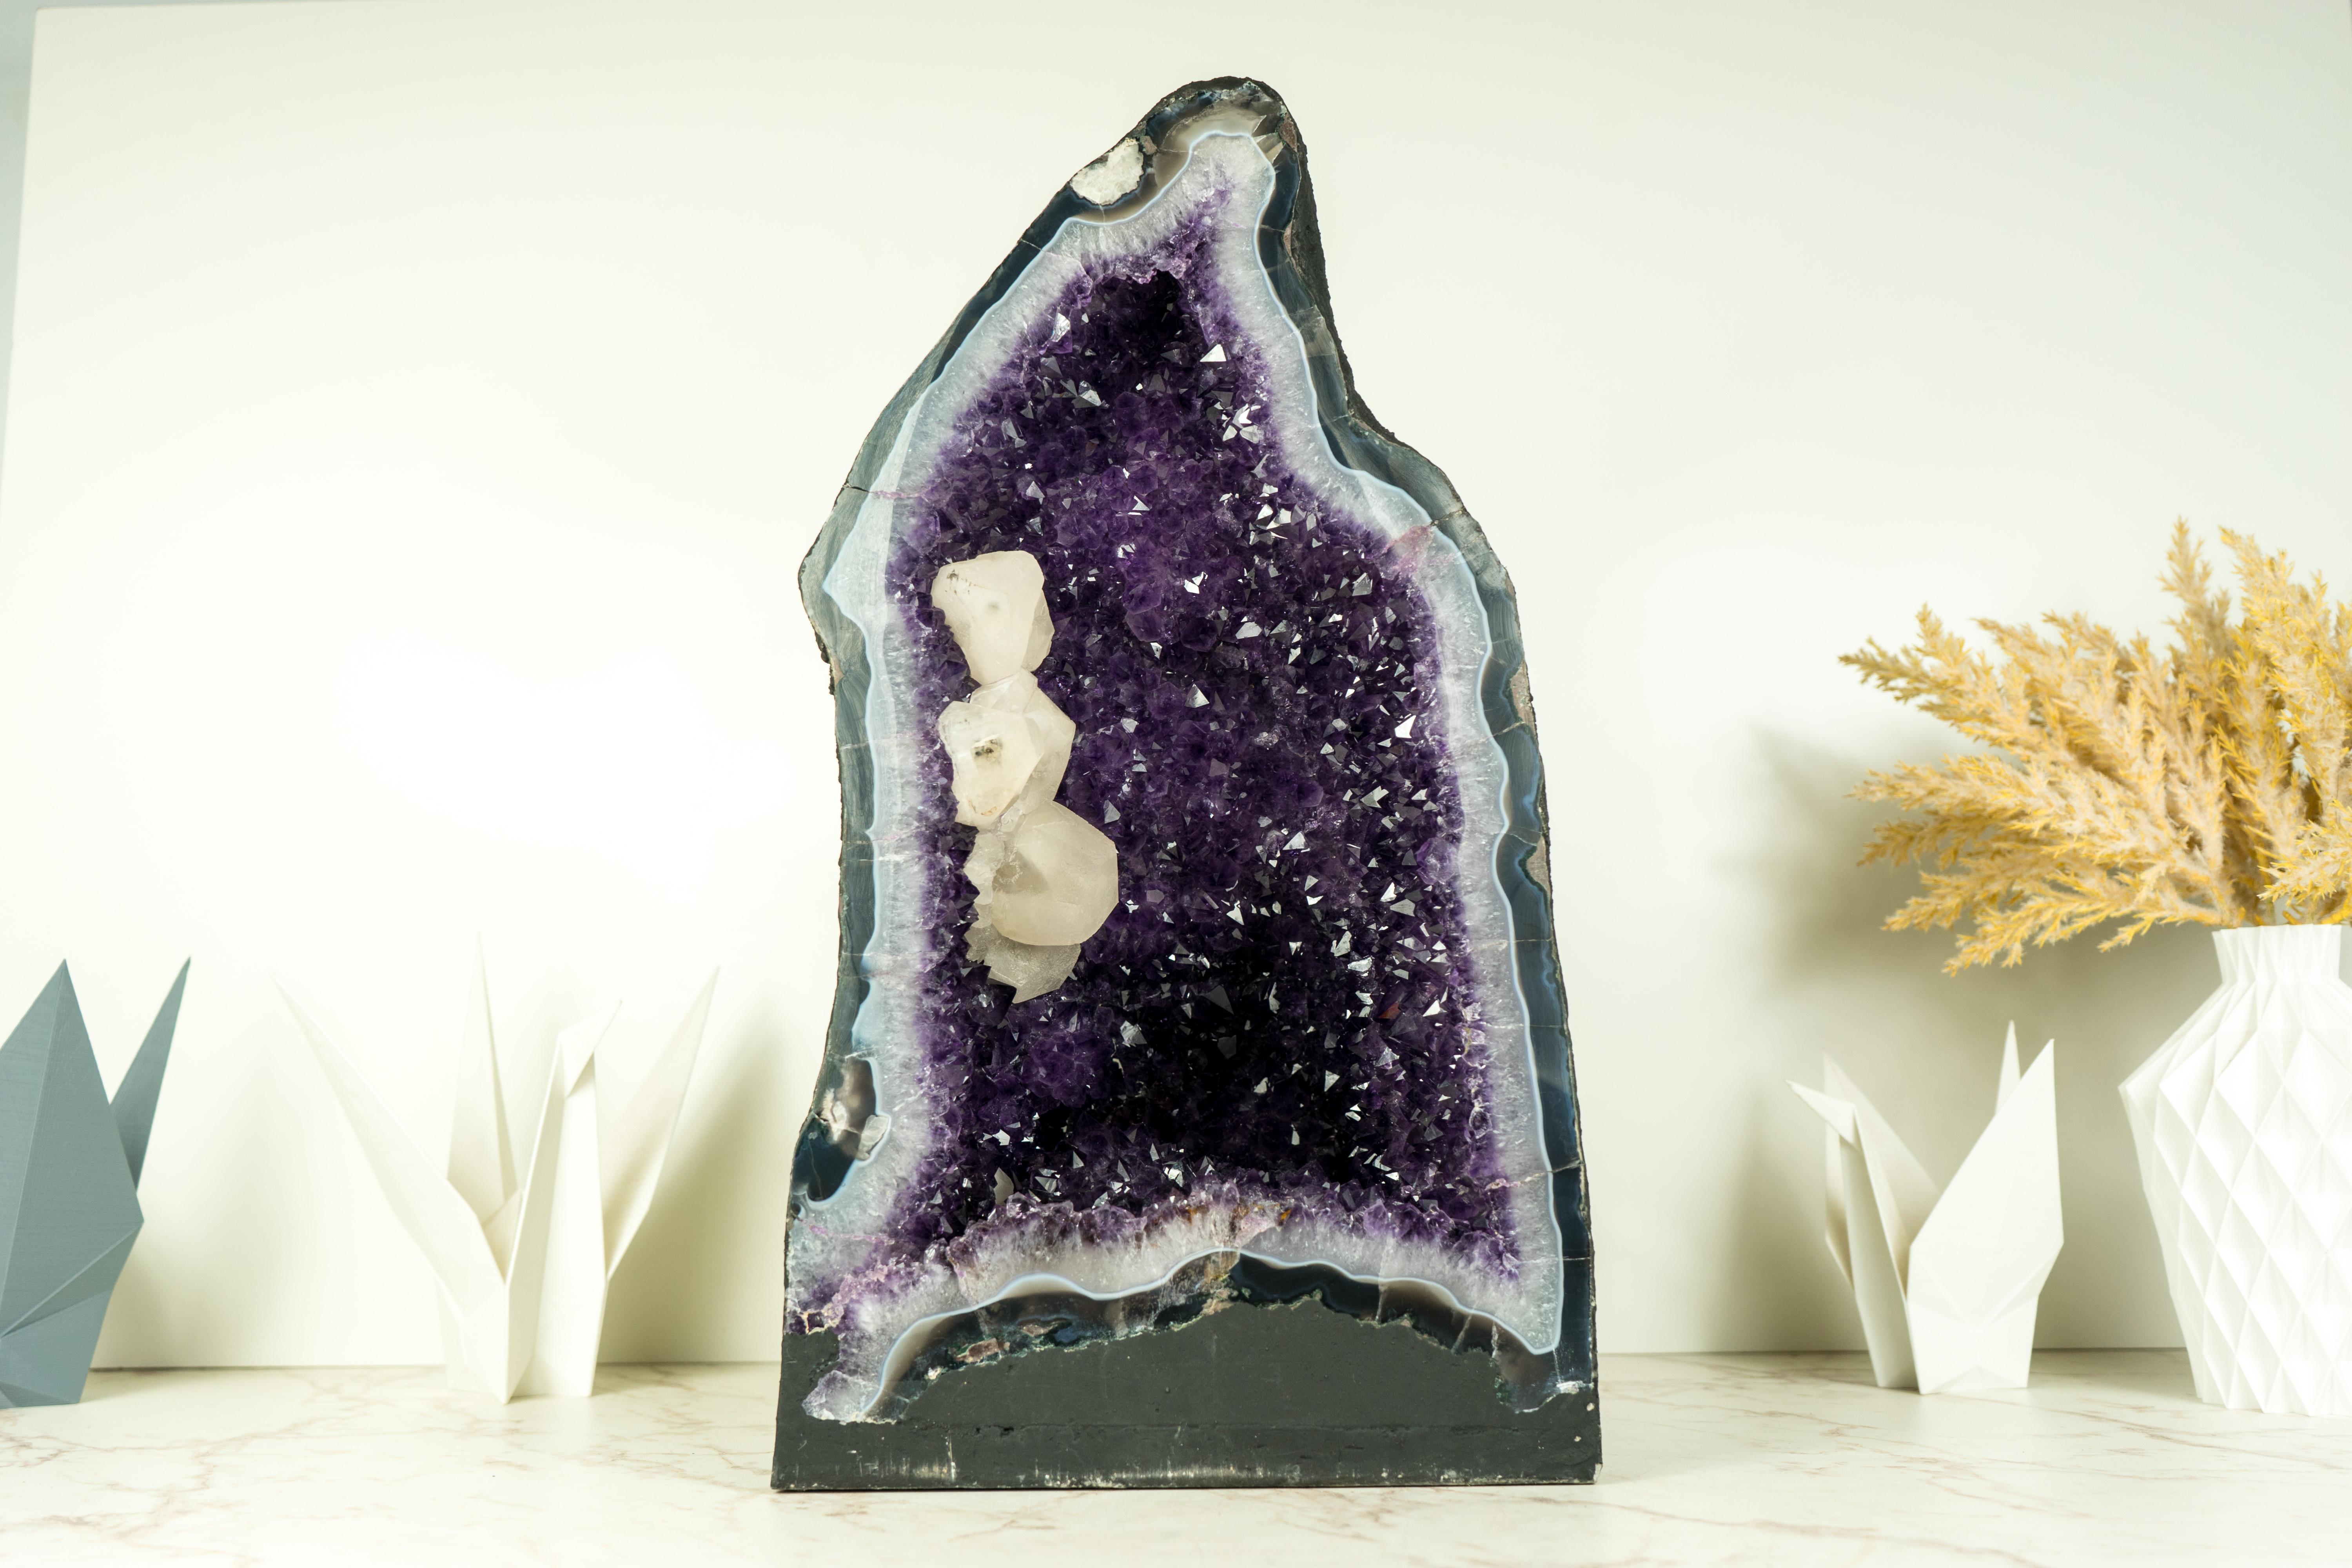 A geode that stands as an impressive natural sculpture, with calcite, deep purple, and shiny amethyst, and an aesthetical calcite inclusion interlacing that forms a unique display of natural artistry, a centerpiece.

Rarely seen in any Amethyst